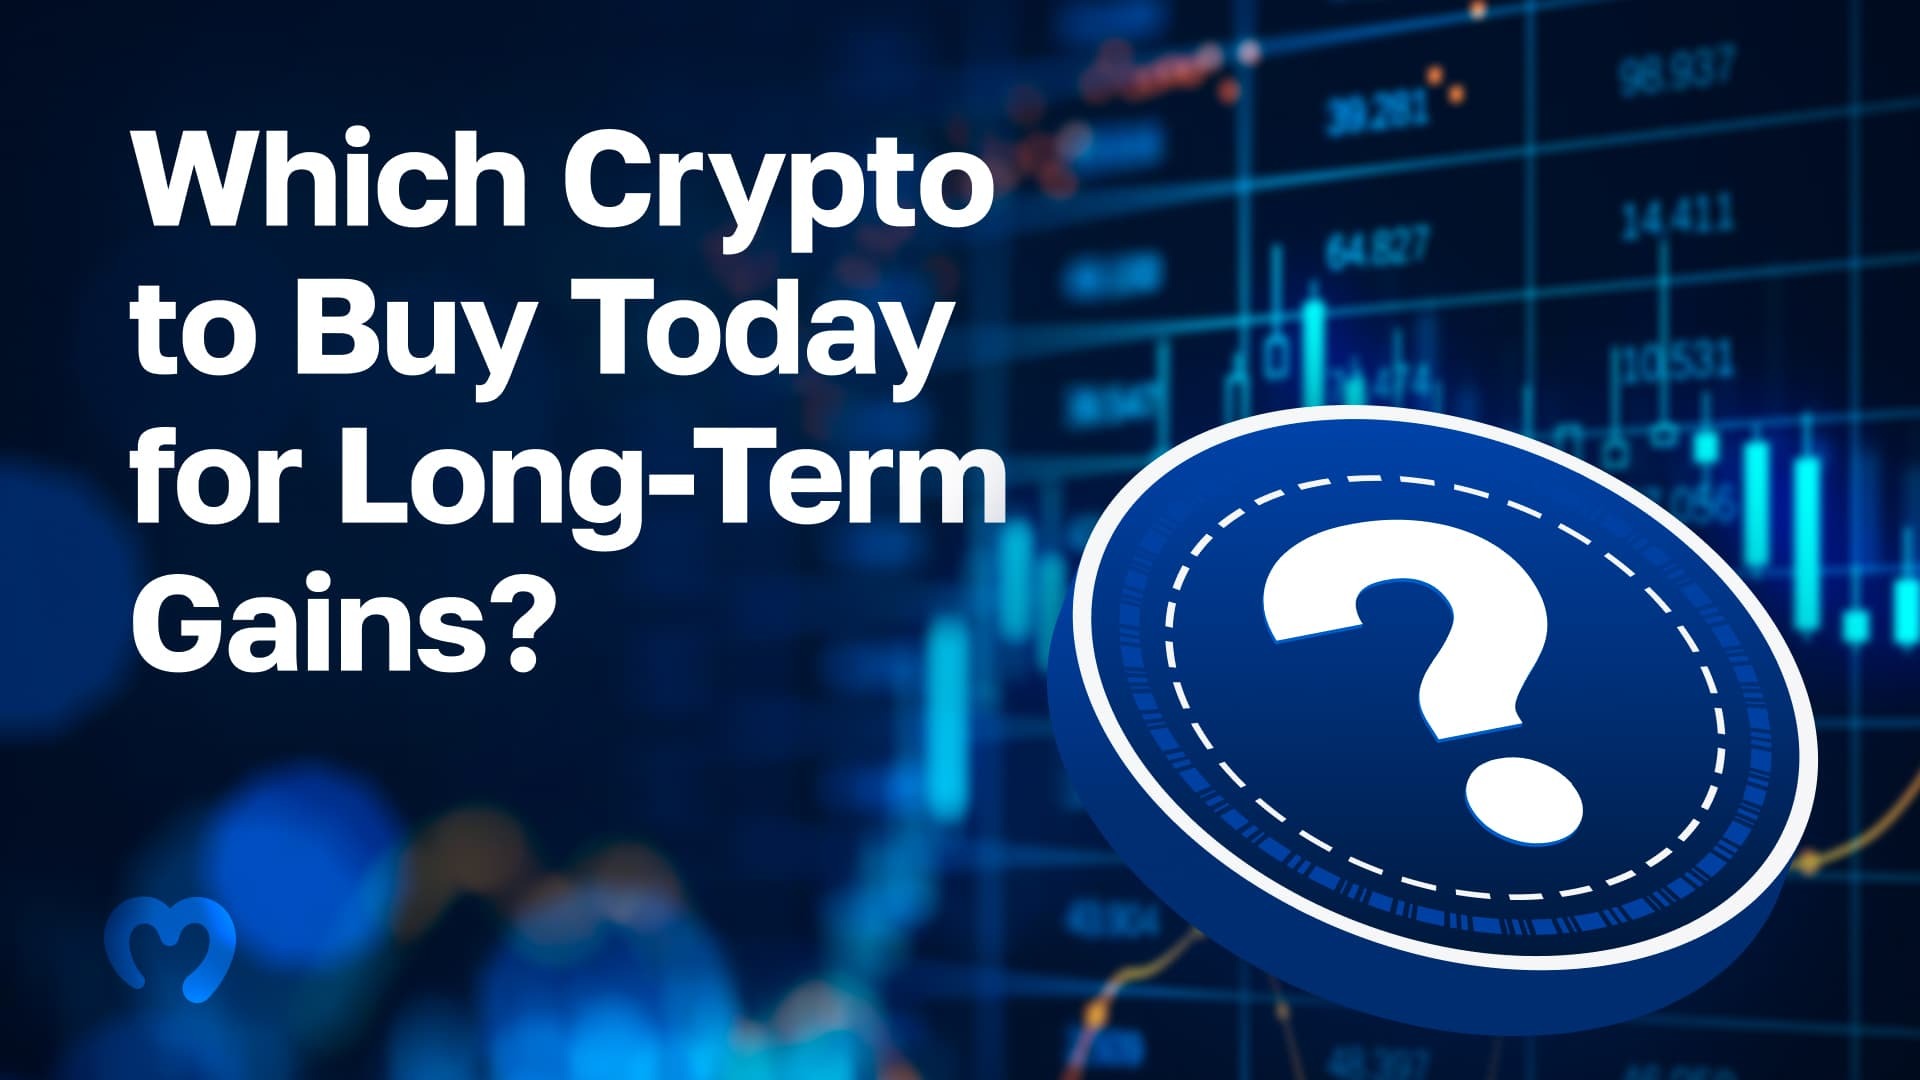 Which Crypto to Buy Today for Long-Term Gains?